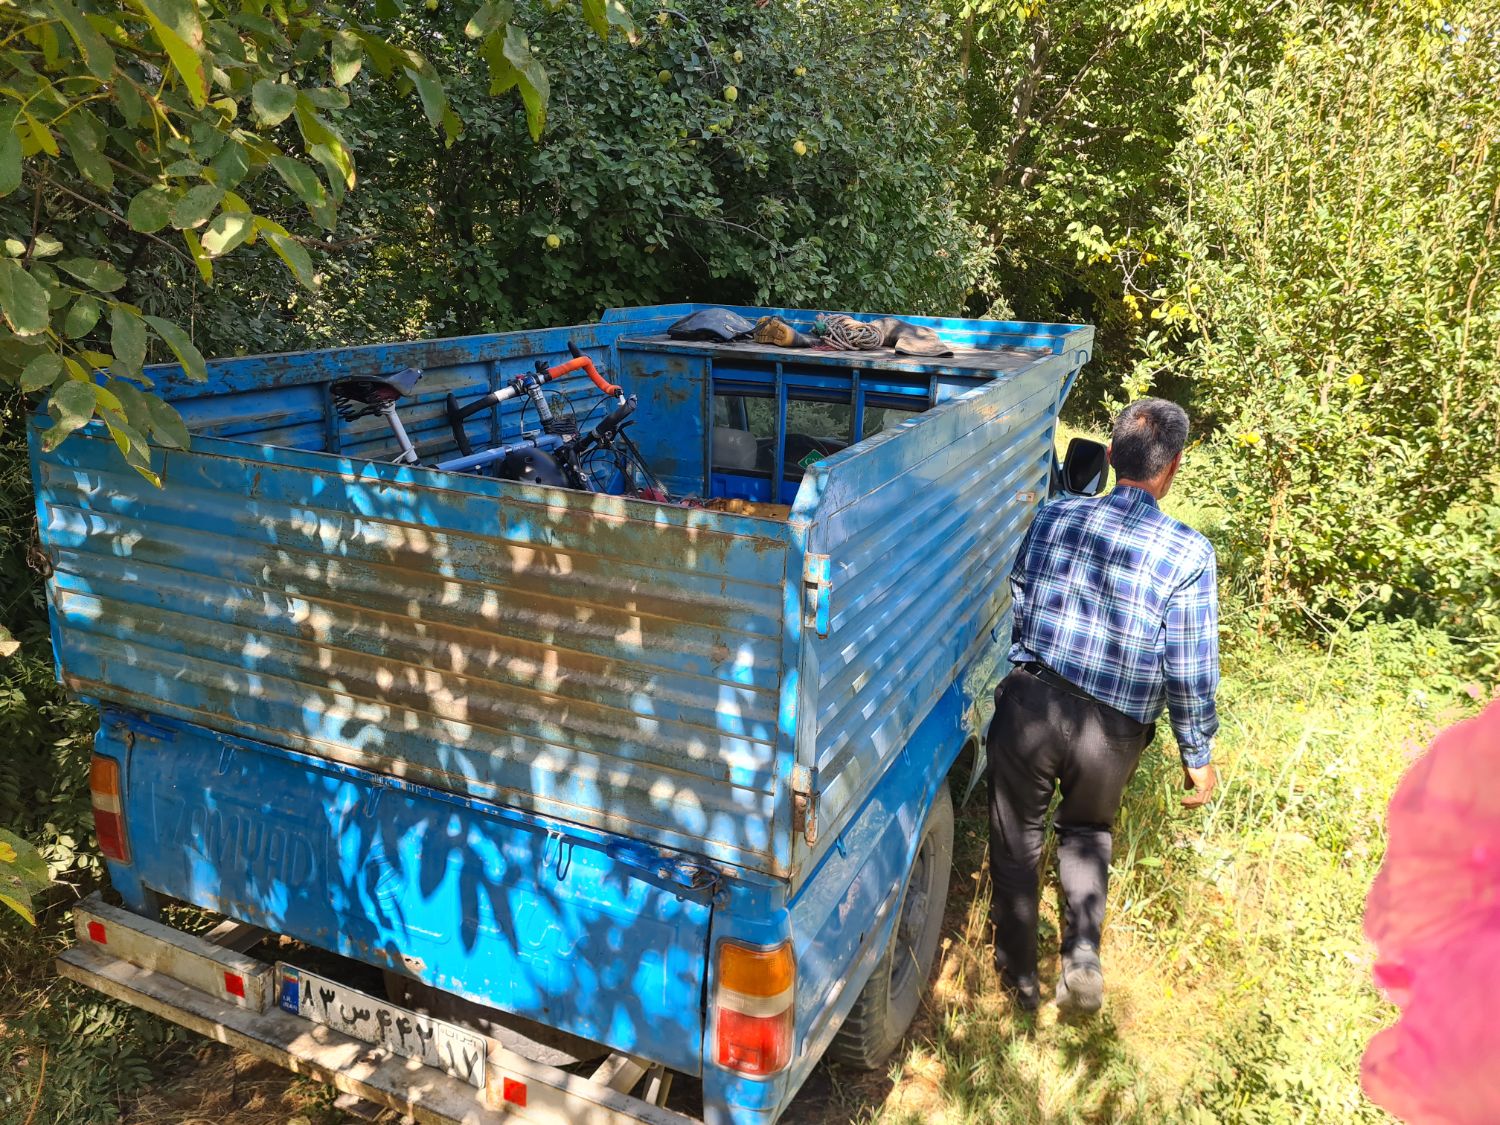 A blue Zamyad truck at one of the fruit gardens